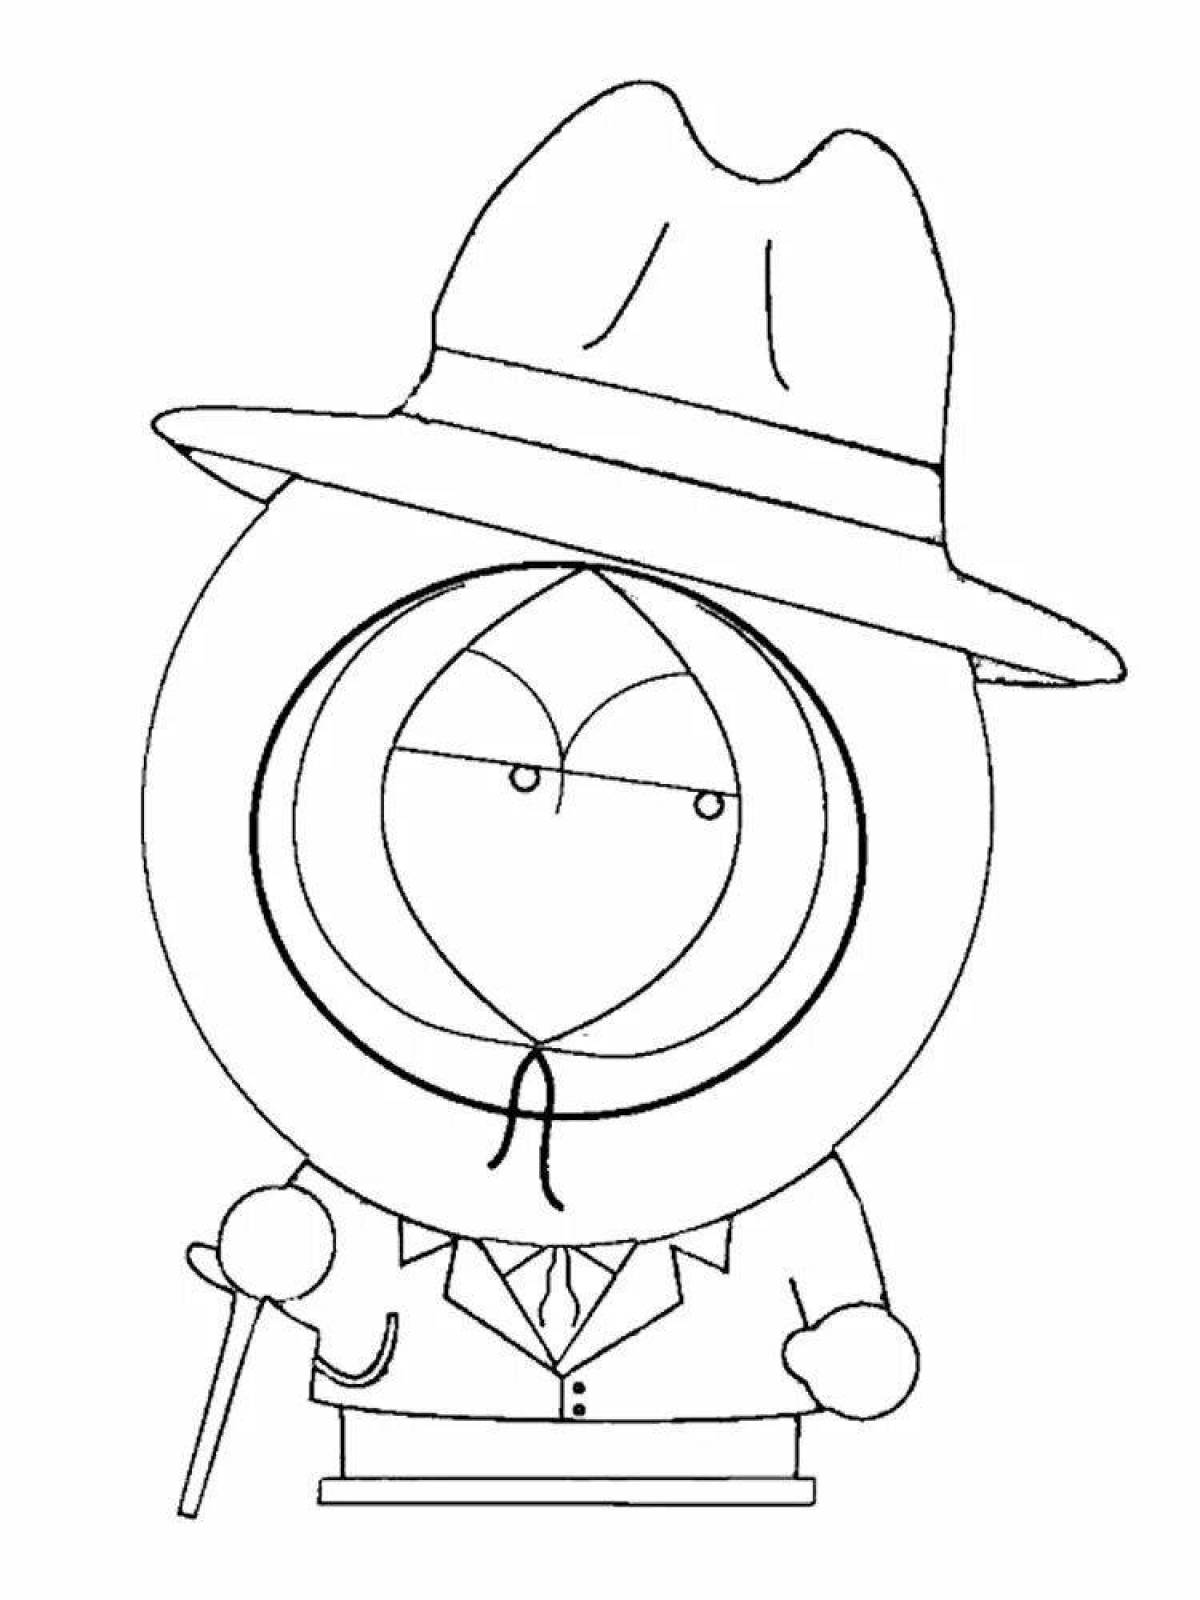 Sunny Kenny coloring page